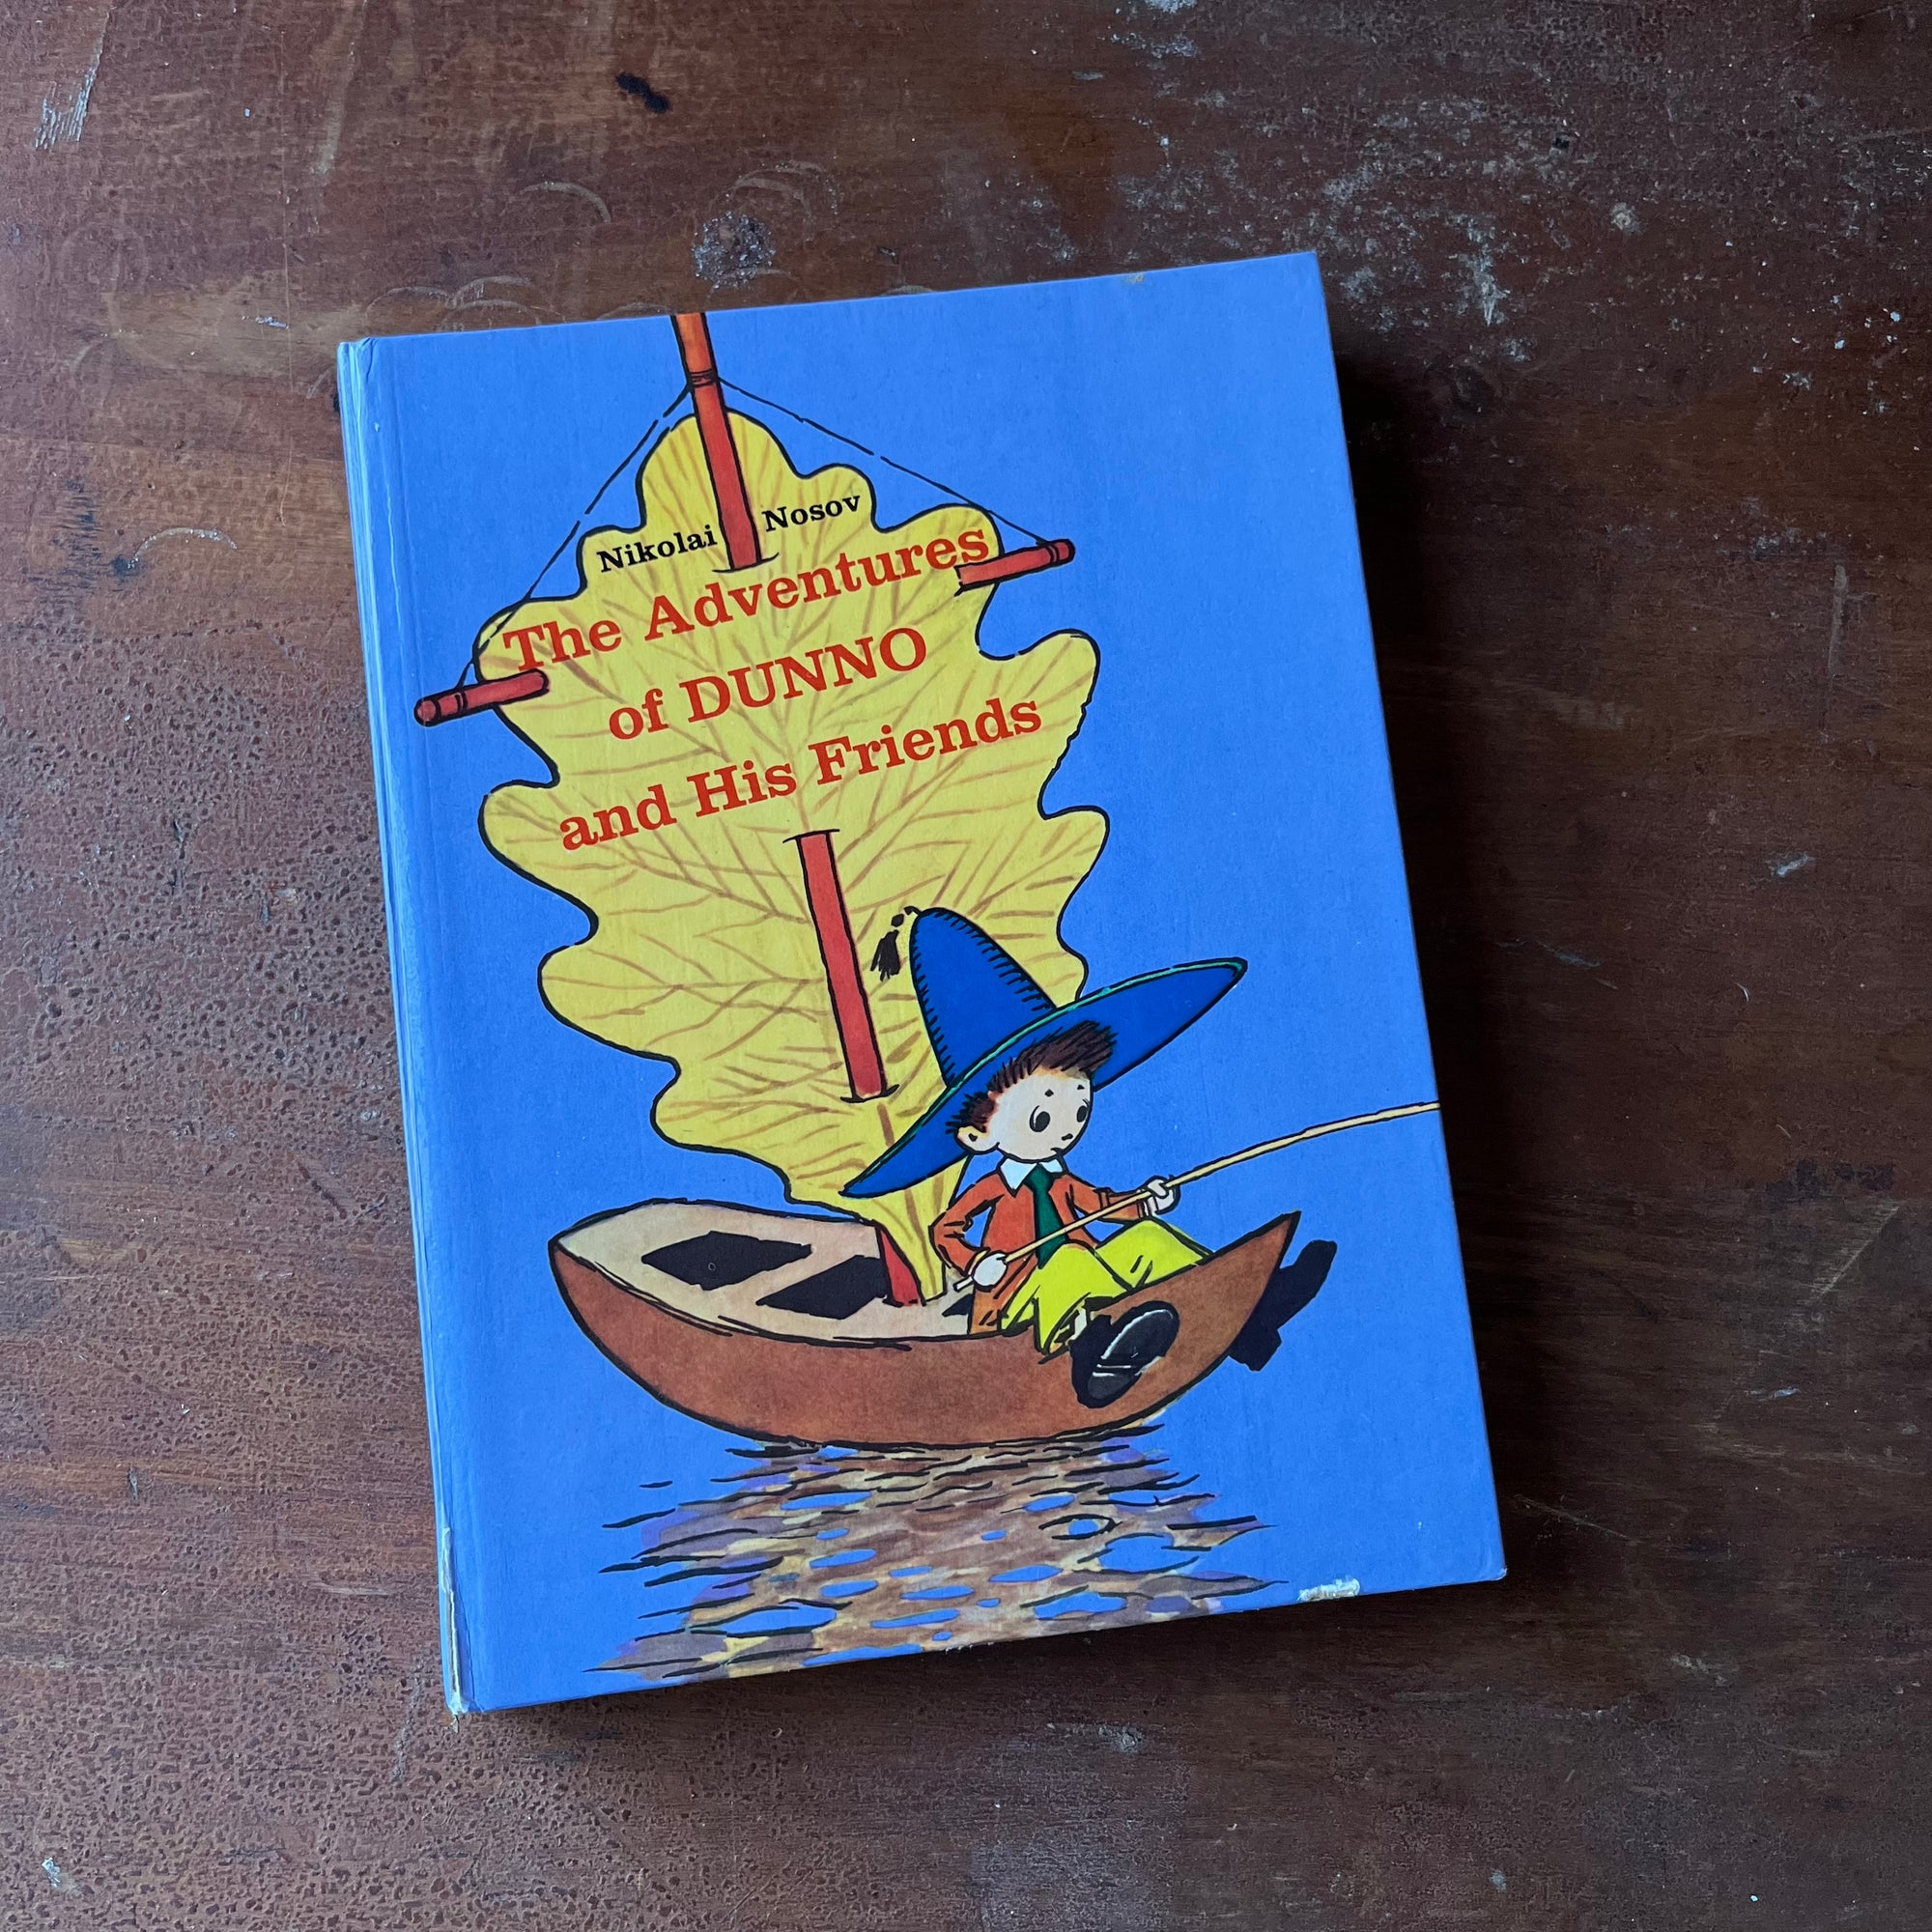 The Adventures of Dunno and His Friends written by Nikolai Nosov-vintage Russian children's book-view of the front cover